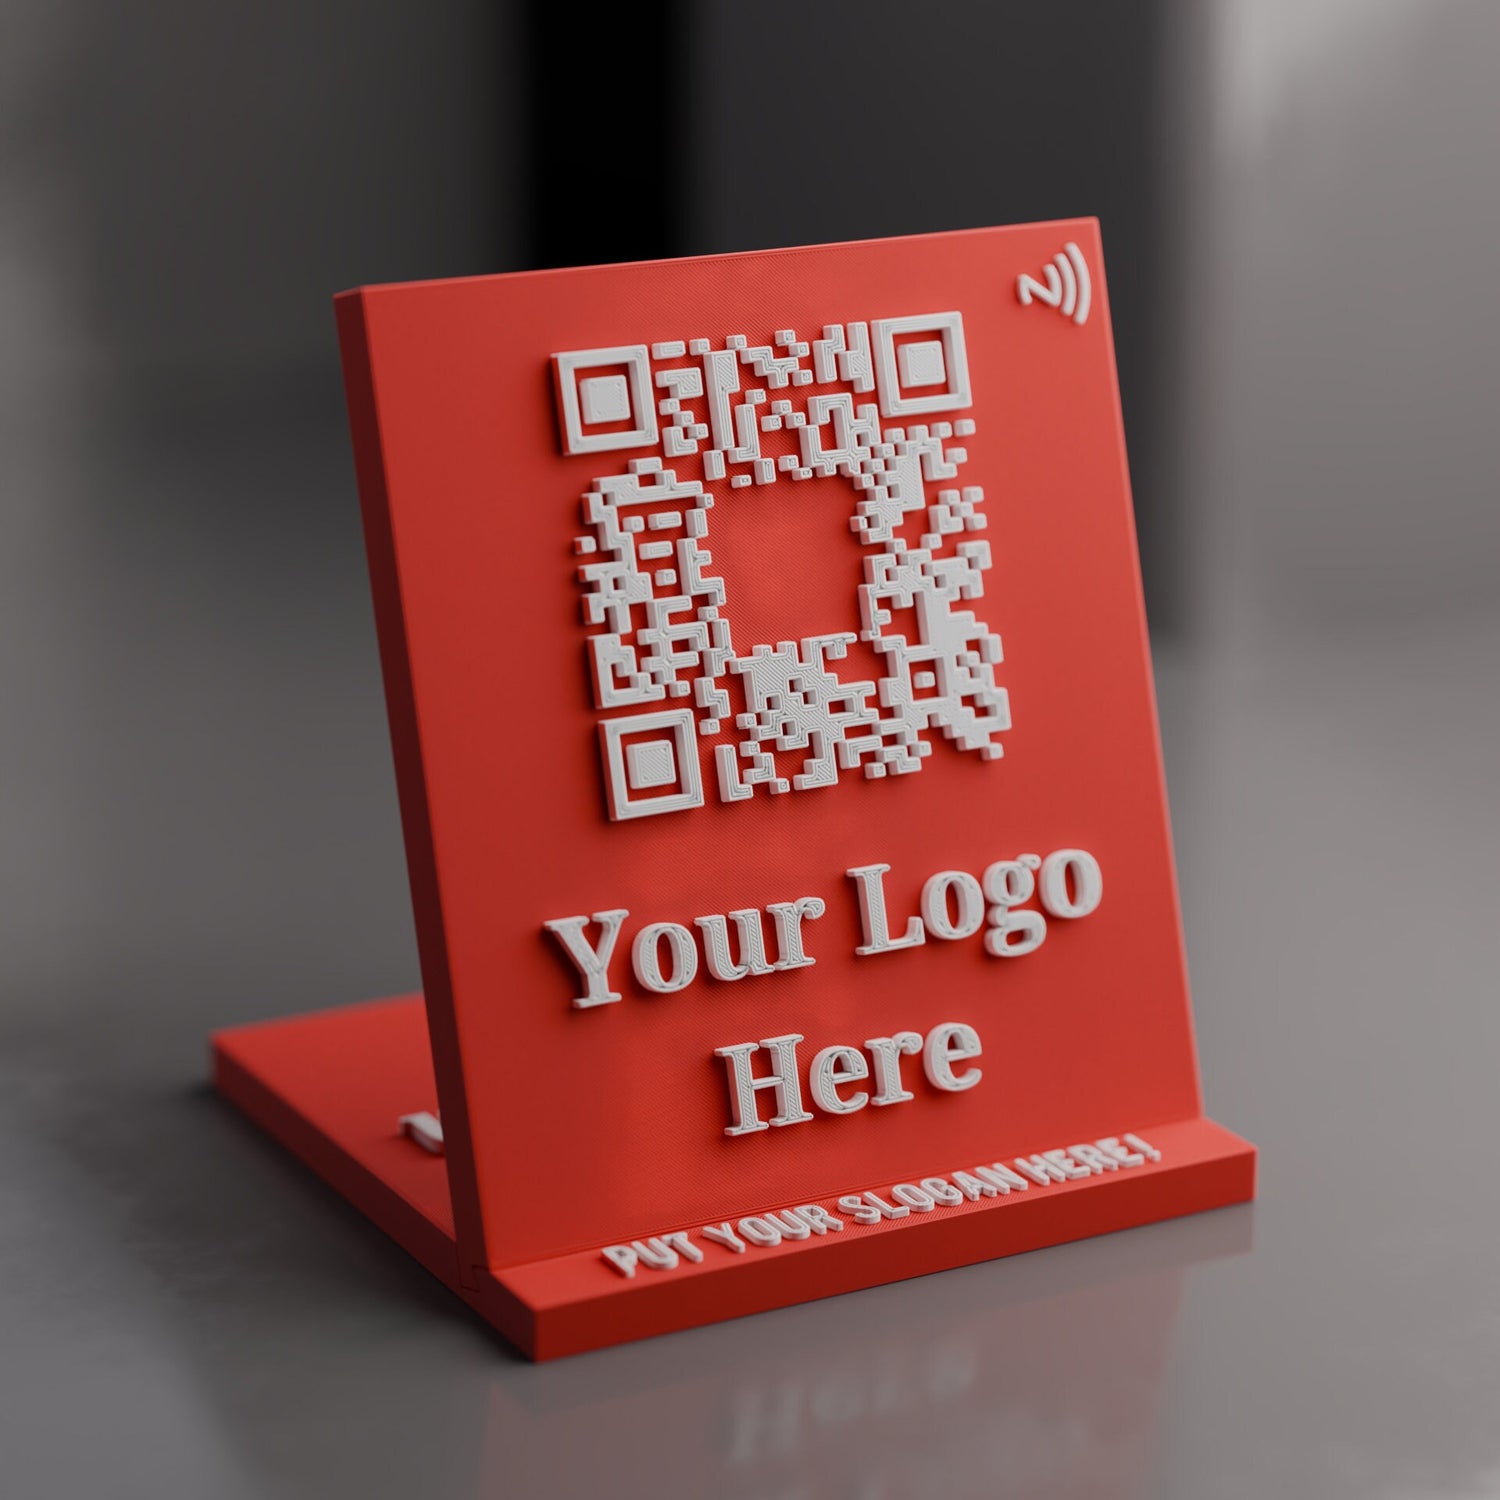 Fully customizable Red Qr Code Stand with NFC Chip - Get google reviews, boost website traffic, advertise social medias, and market your brand better.